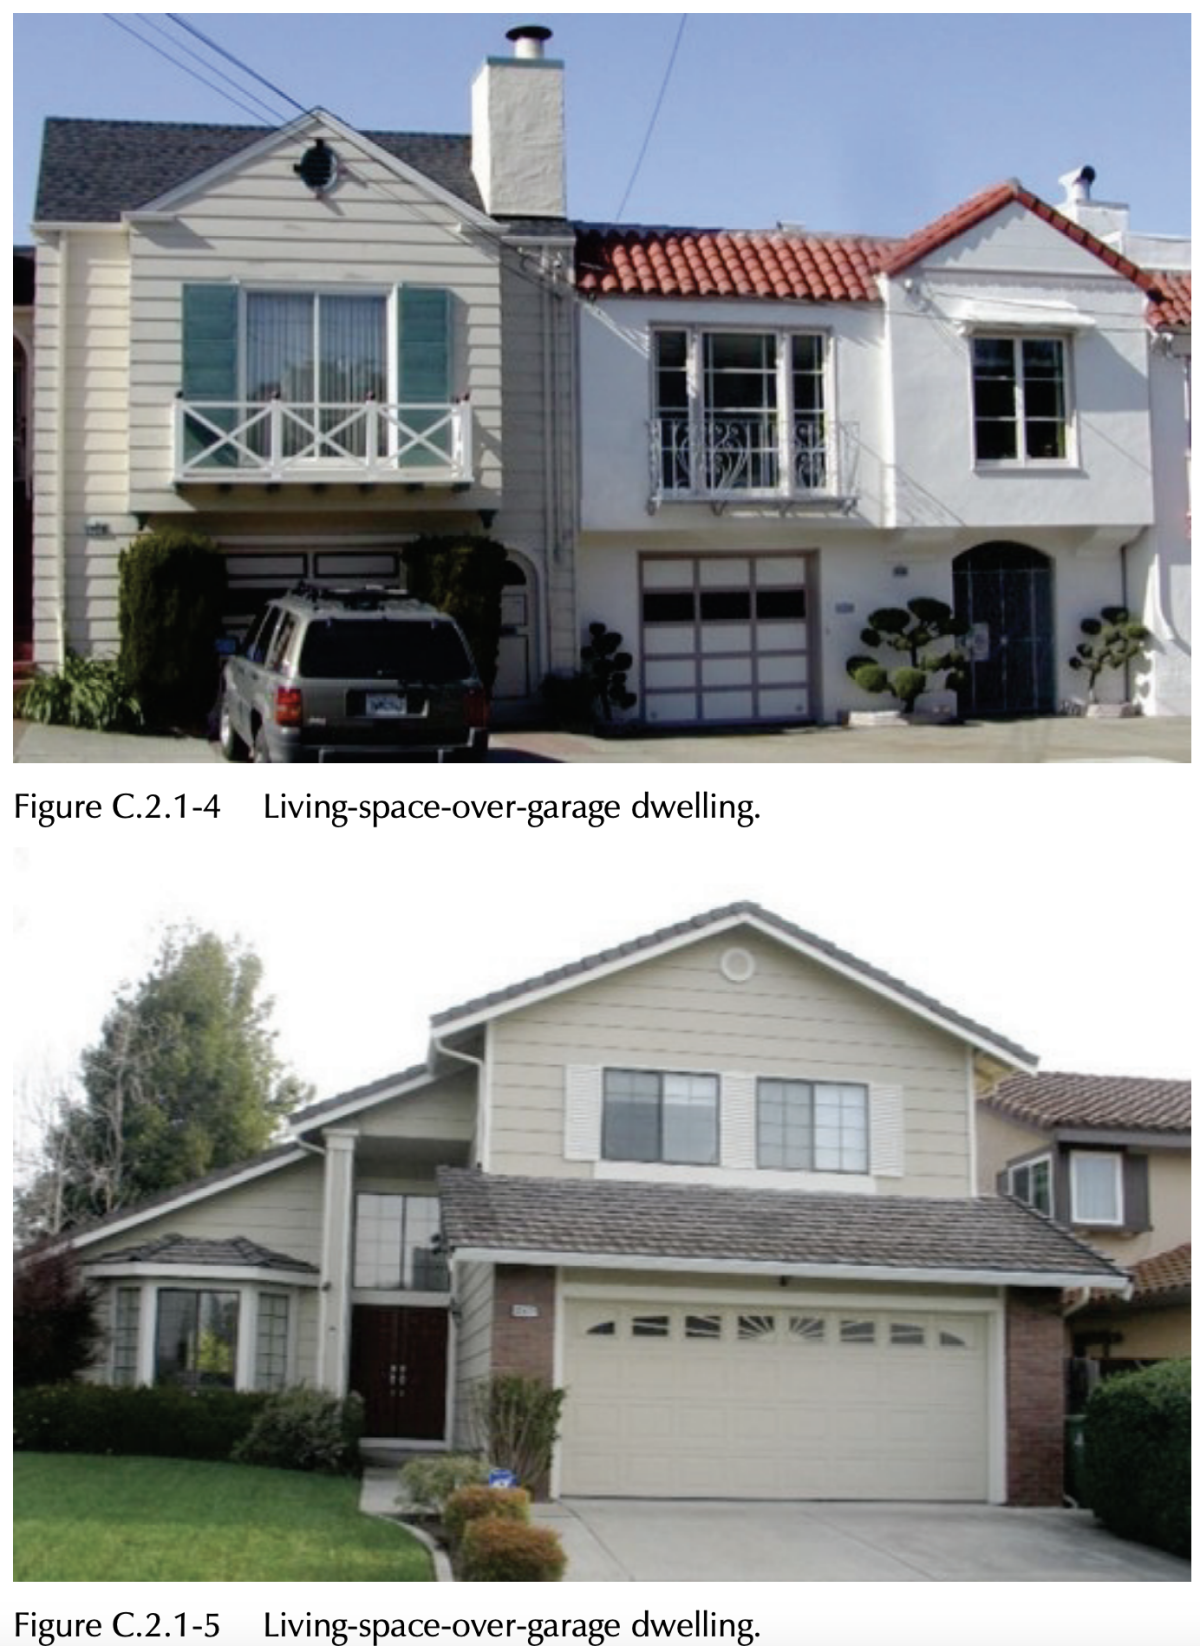 Homes with living spaces over garages can be vulnerable to collapse in an earthquake.